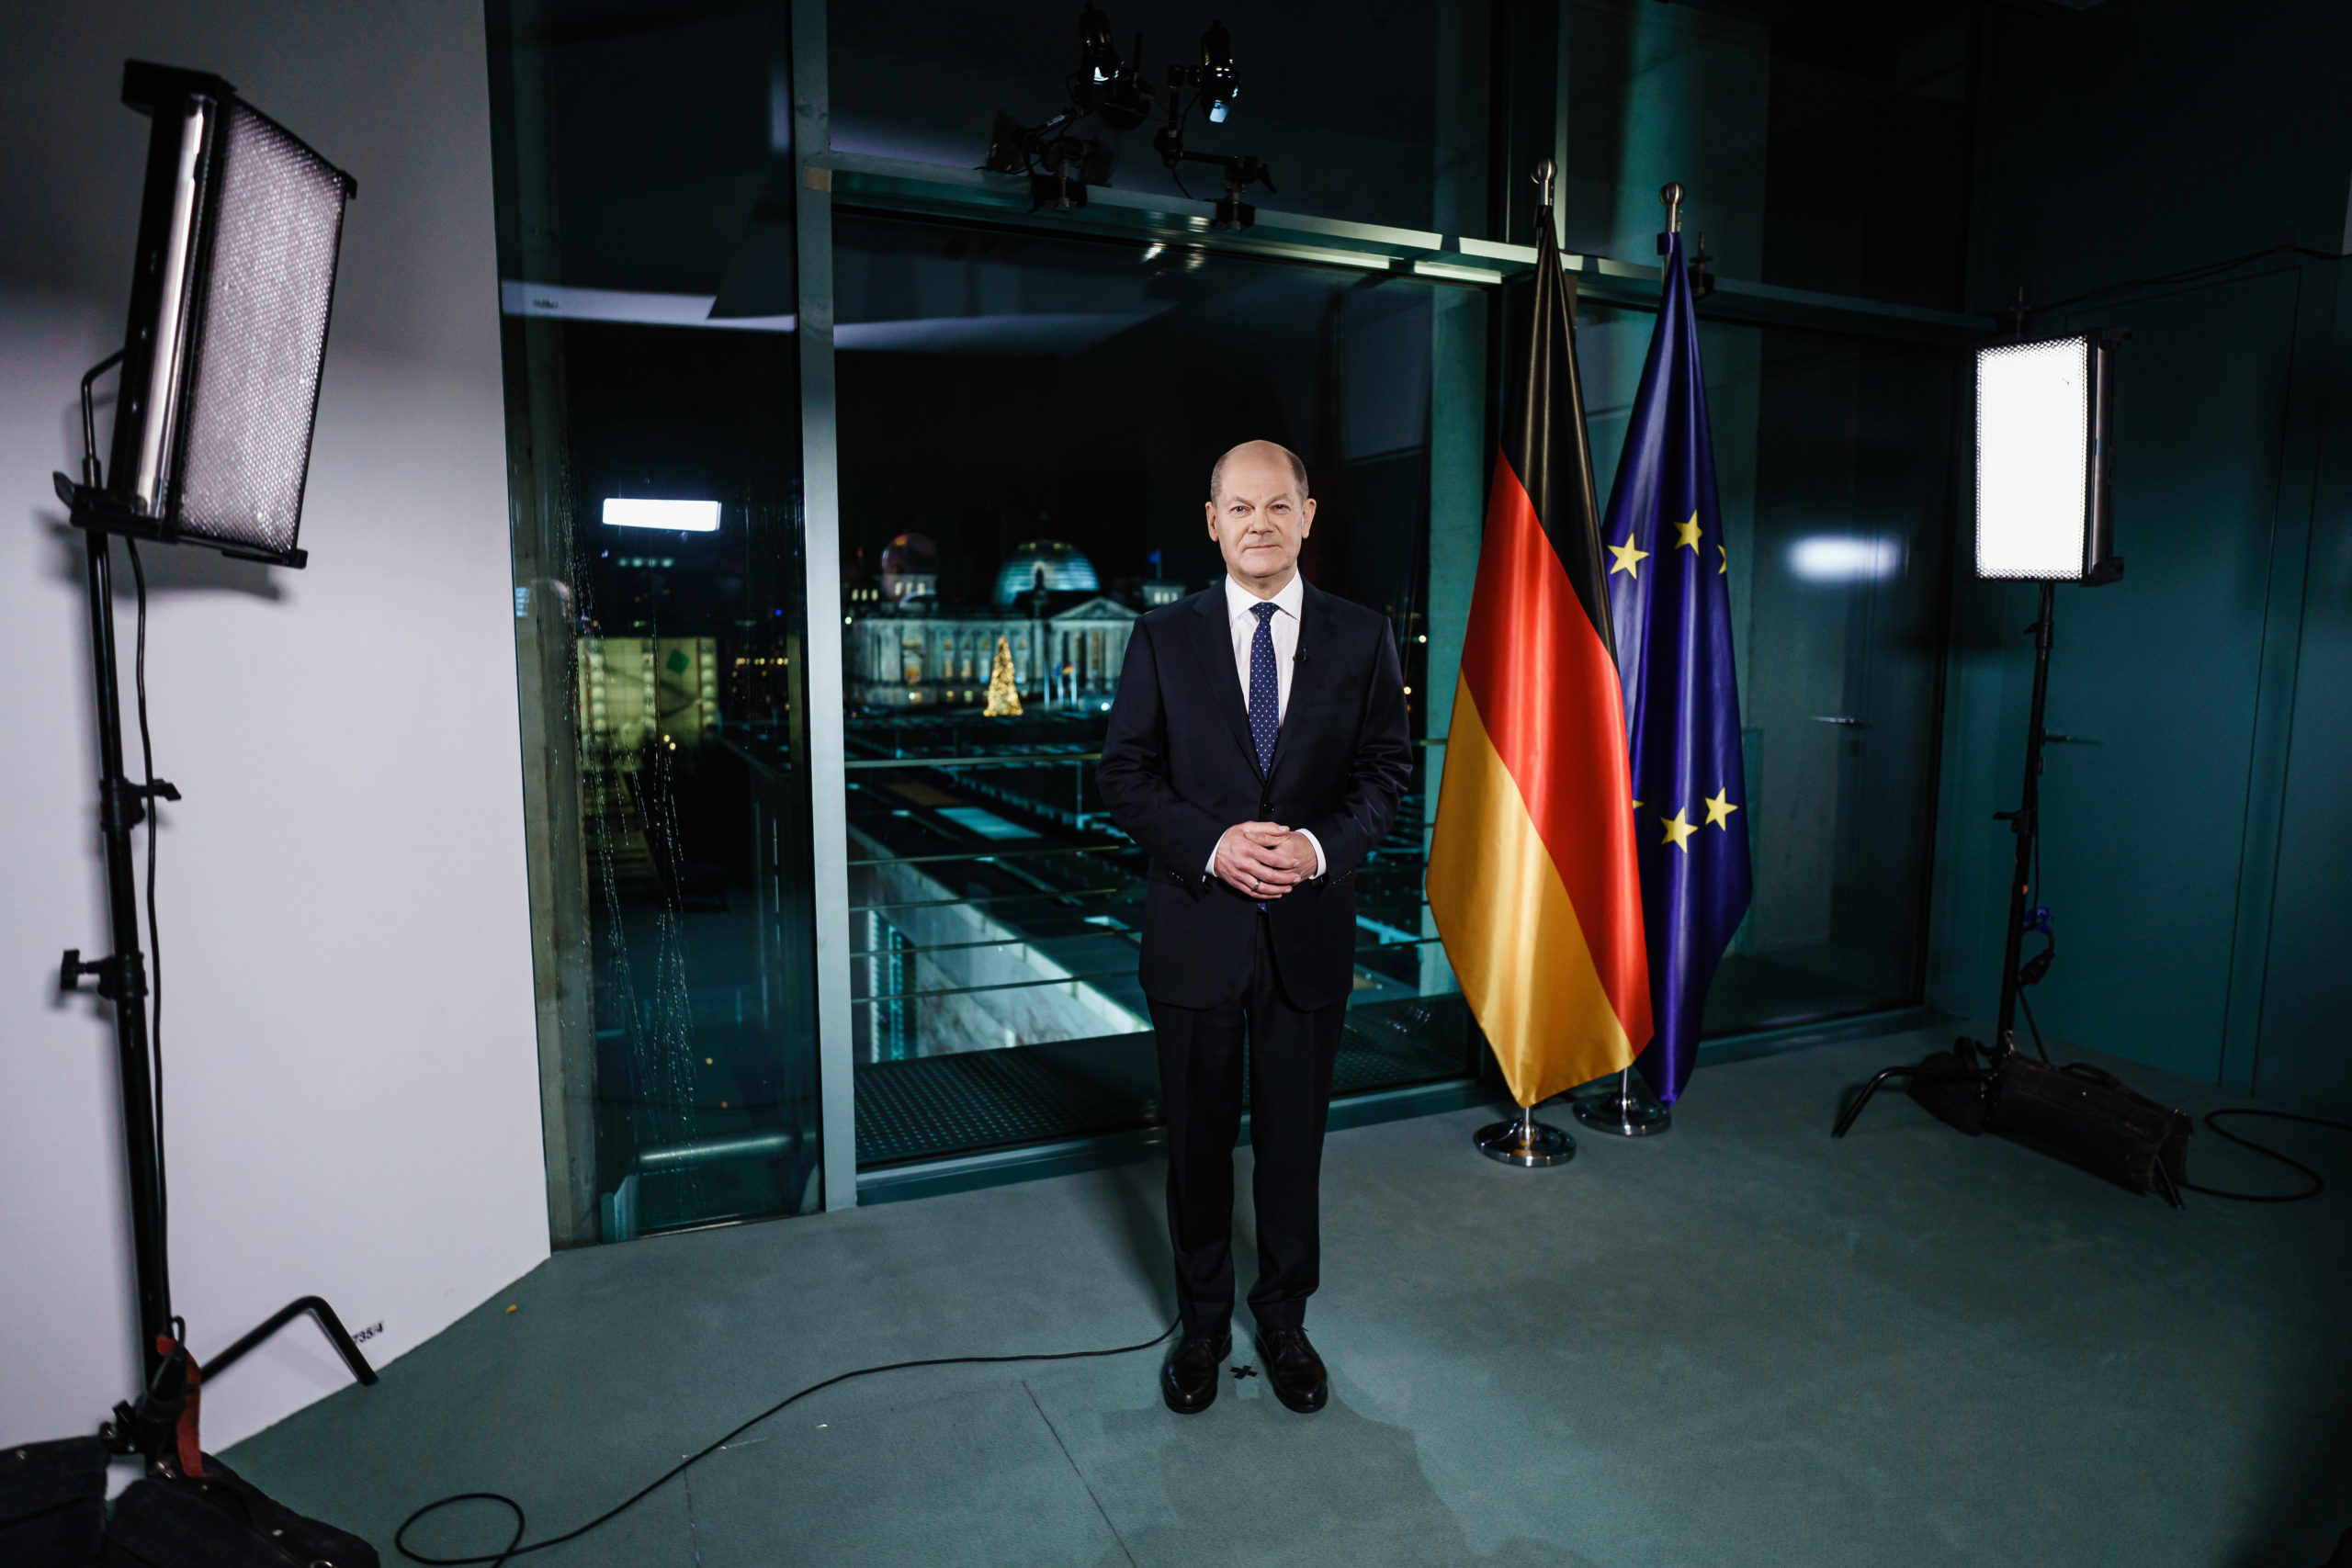 German Chancellor Olaf Scholz poses for photographs after giving a New Year speech on Dec. 30 in Berlin, Germany. (Clemens Bilan/Pool/Getty Images)